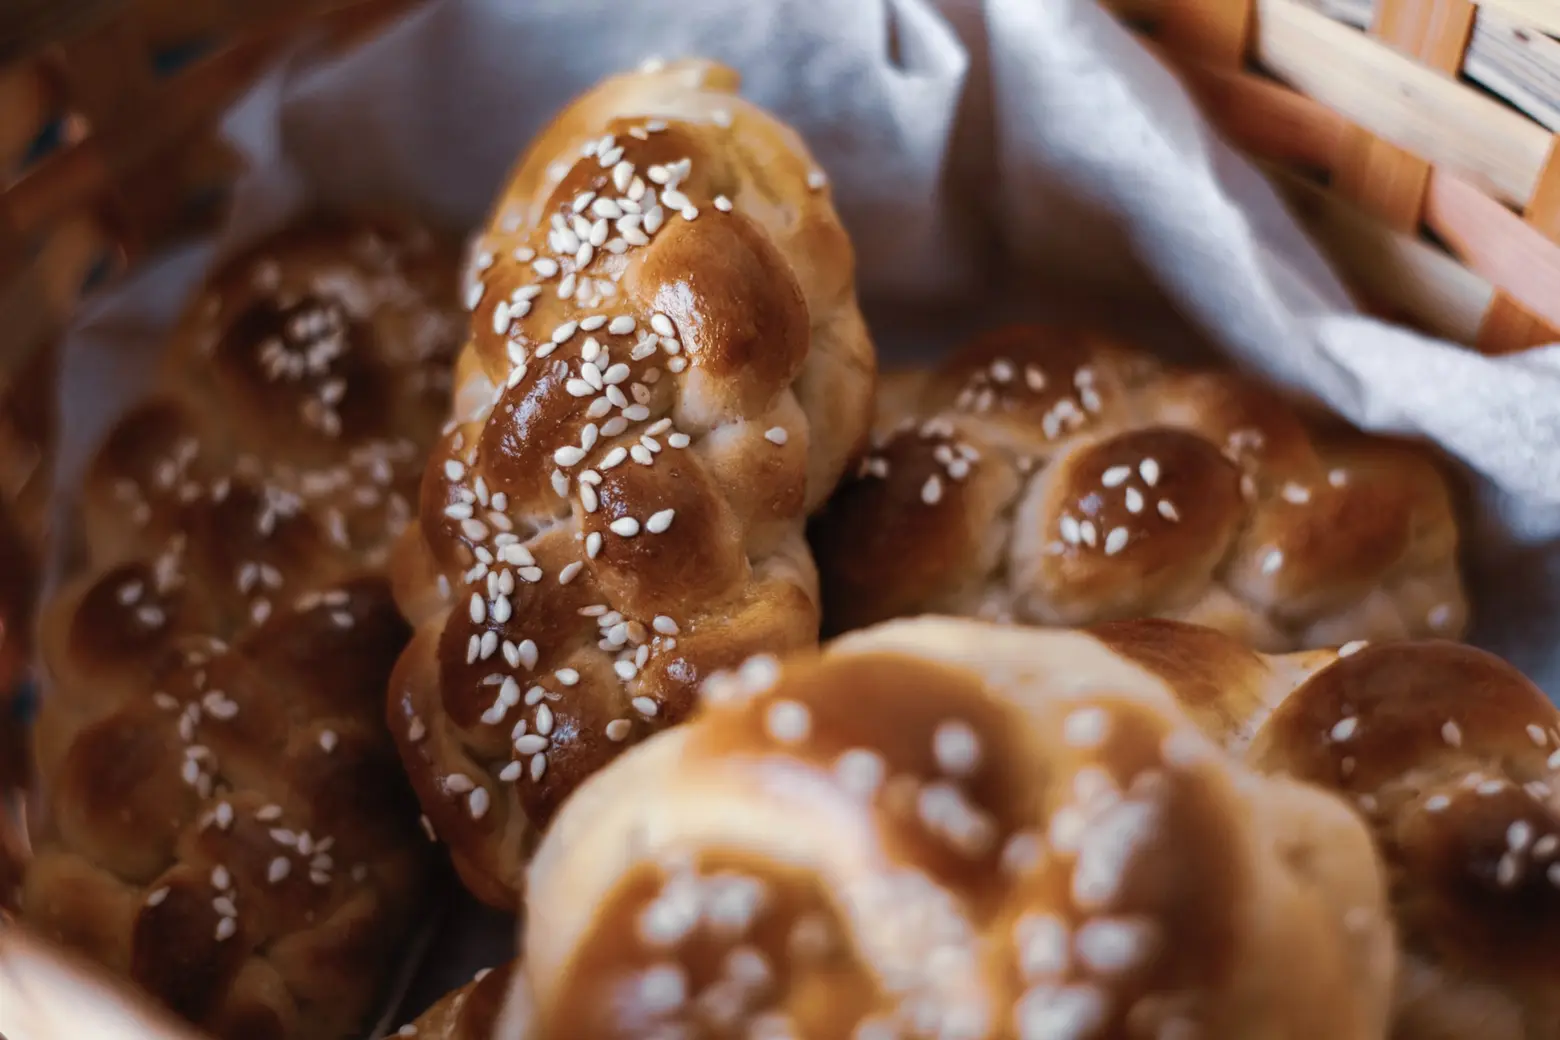 The best places in New York City to get challah bread